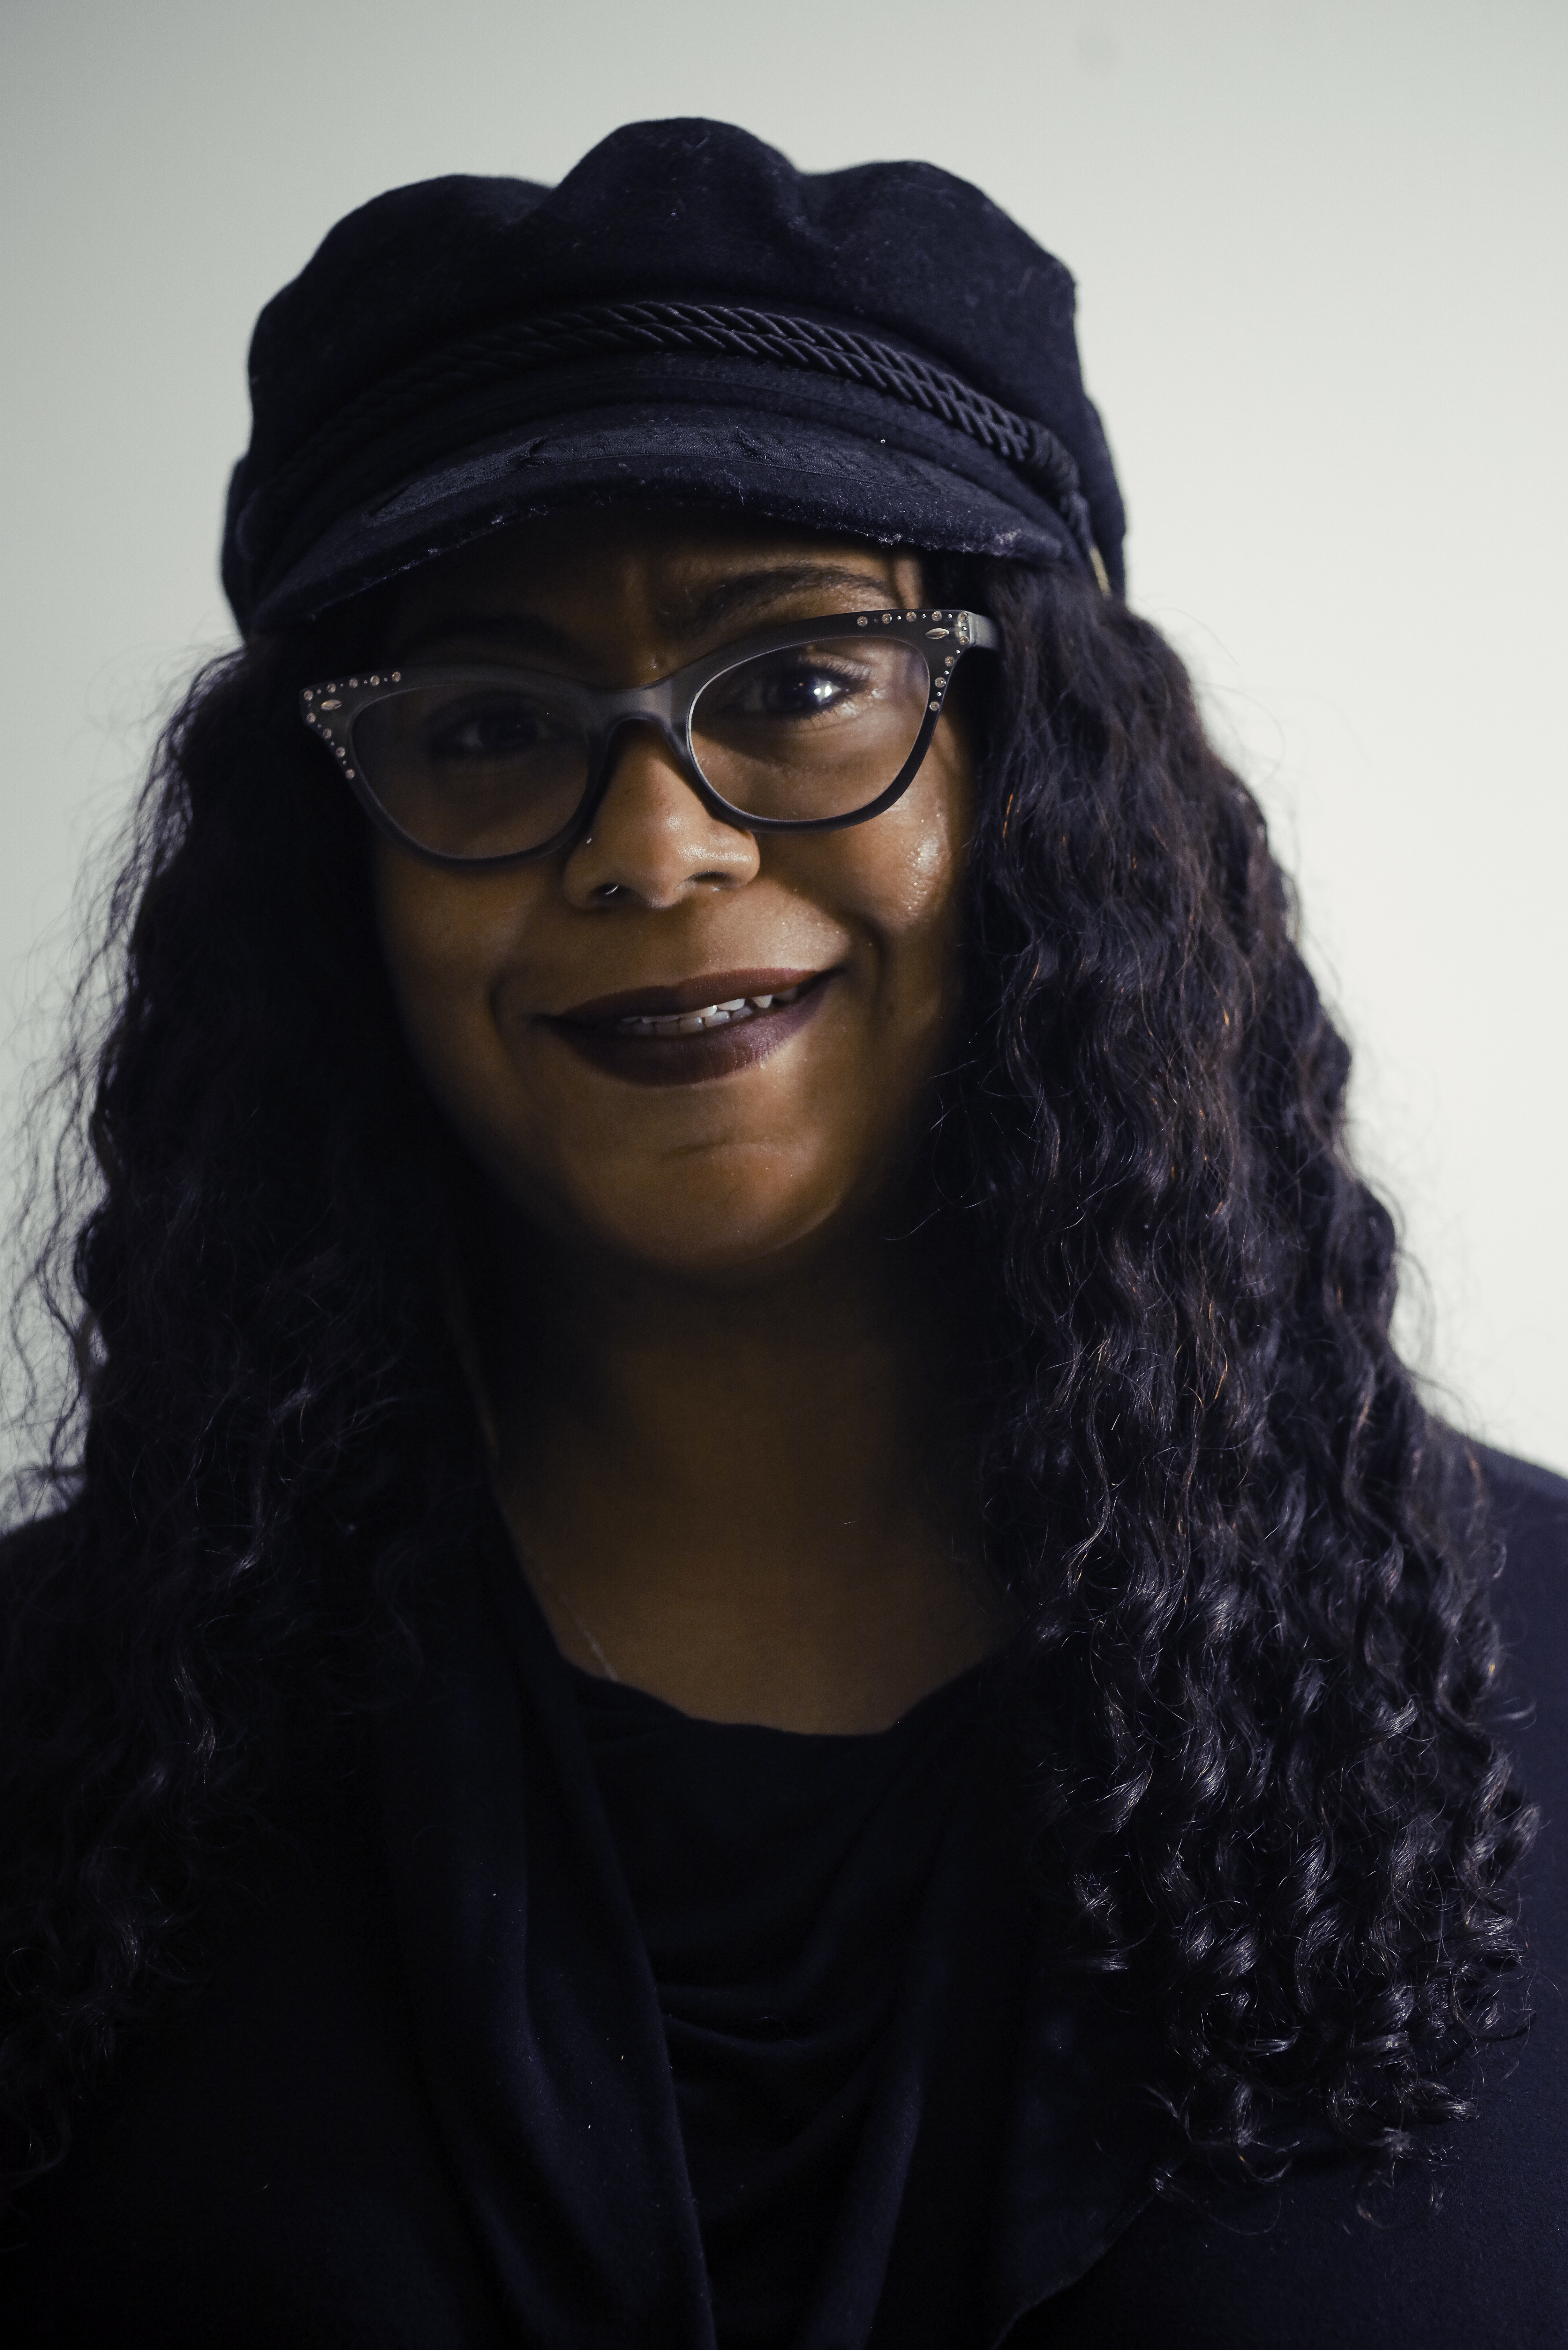 headshot of Shay Bouley, african american woman smiling with glasses and black hat